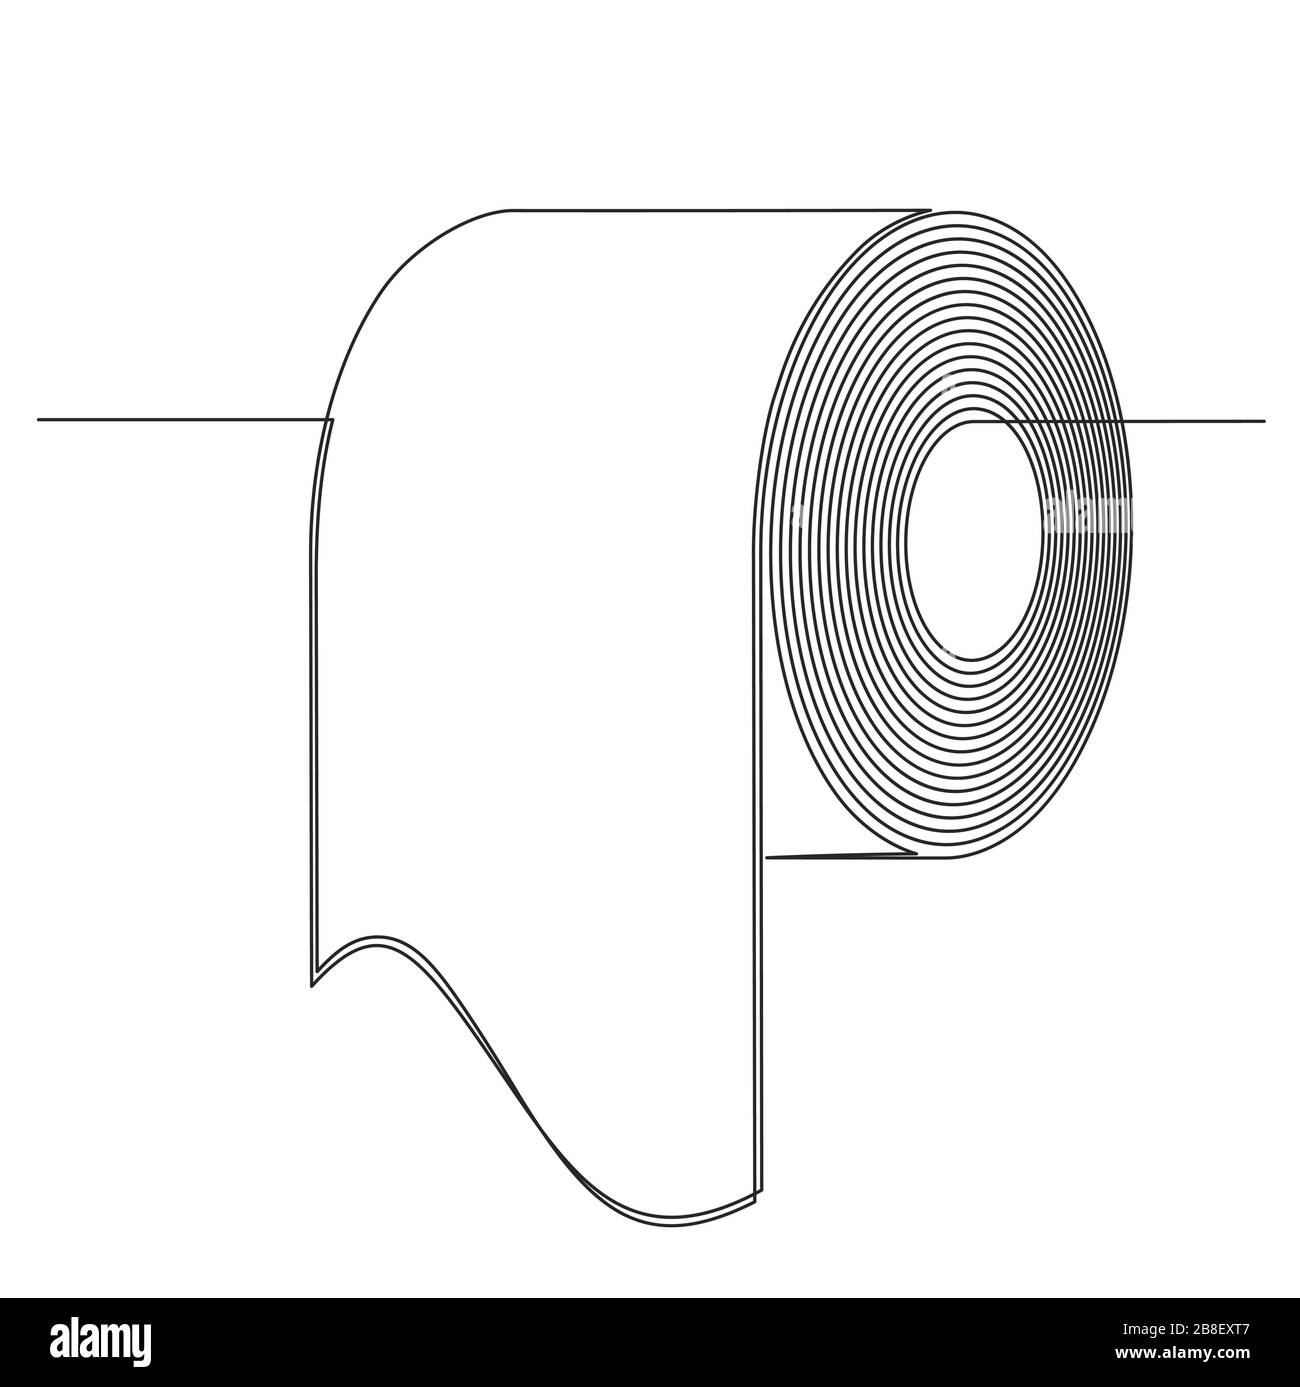 Roll of toilet paper in one continuous long line drawing style. Black and white vector illustration for your design. Panic shopping, increased demand Stock Vector